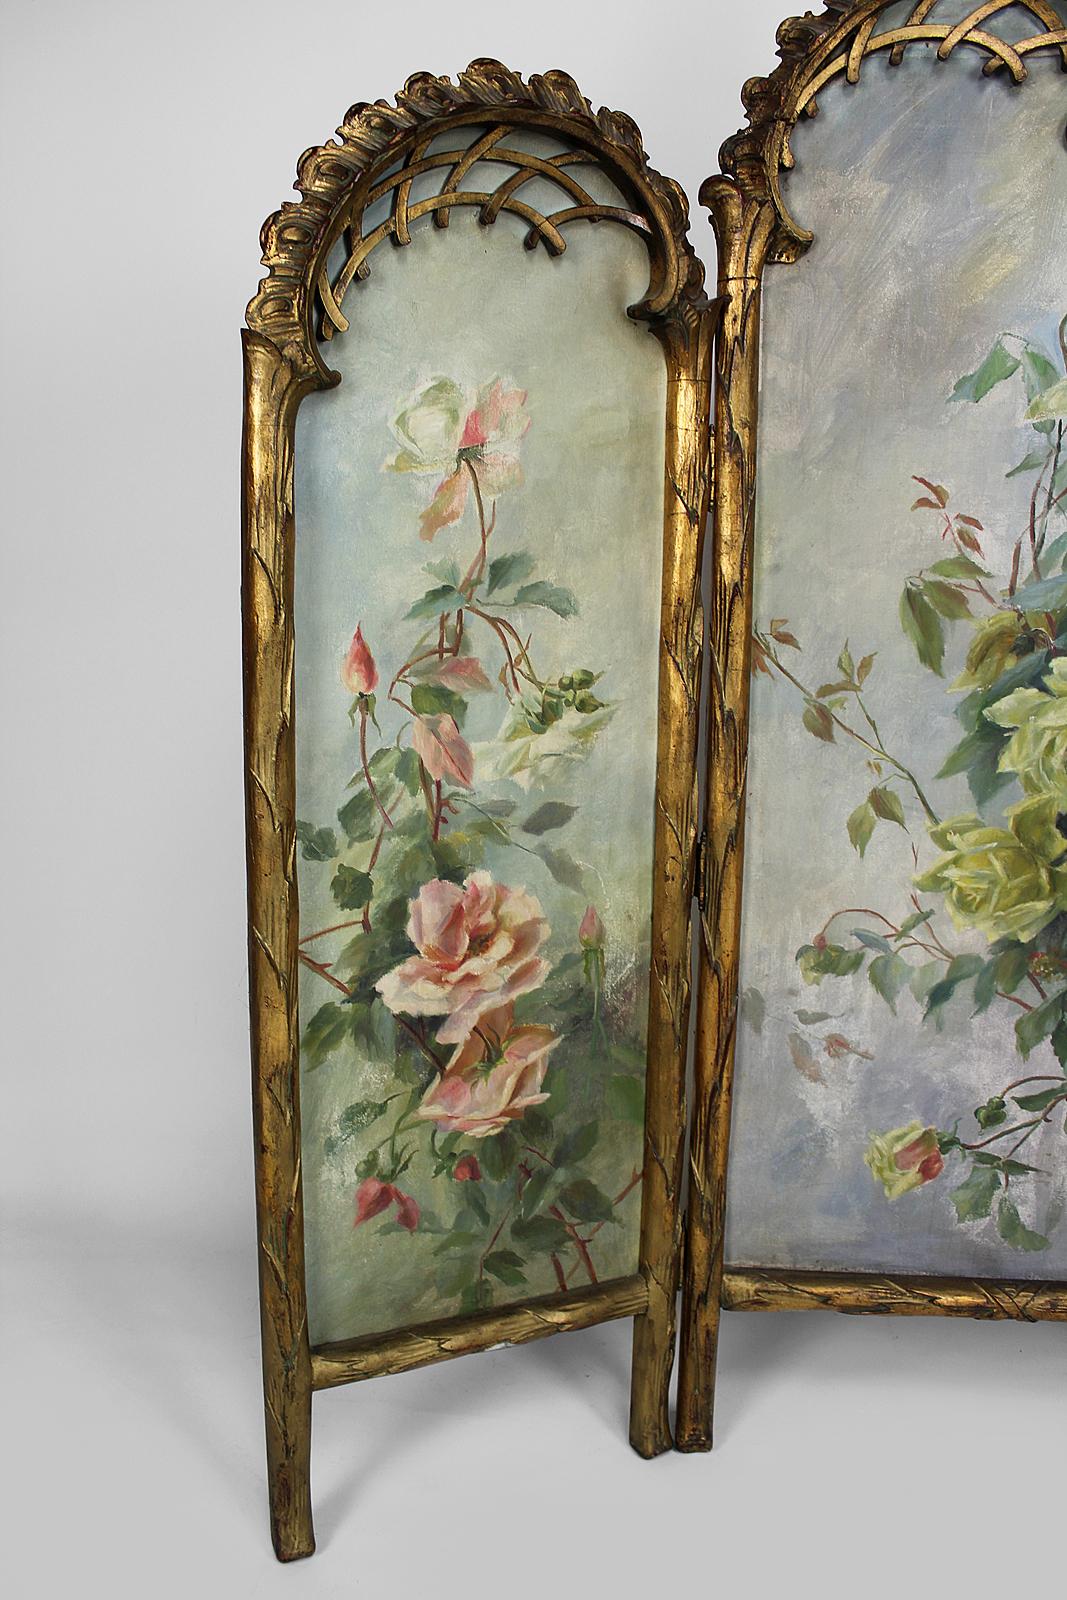 Belle Époque Belle Epoque Folding Screen, Gilded Carved Wood and Naturalist Paintings, 1880s